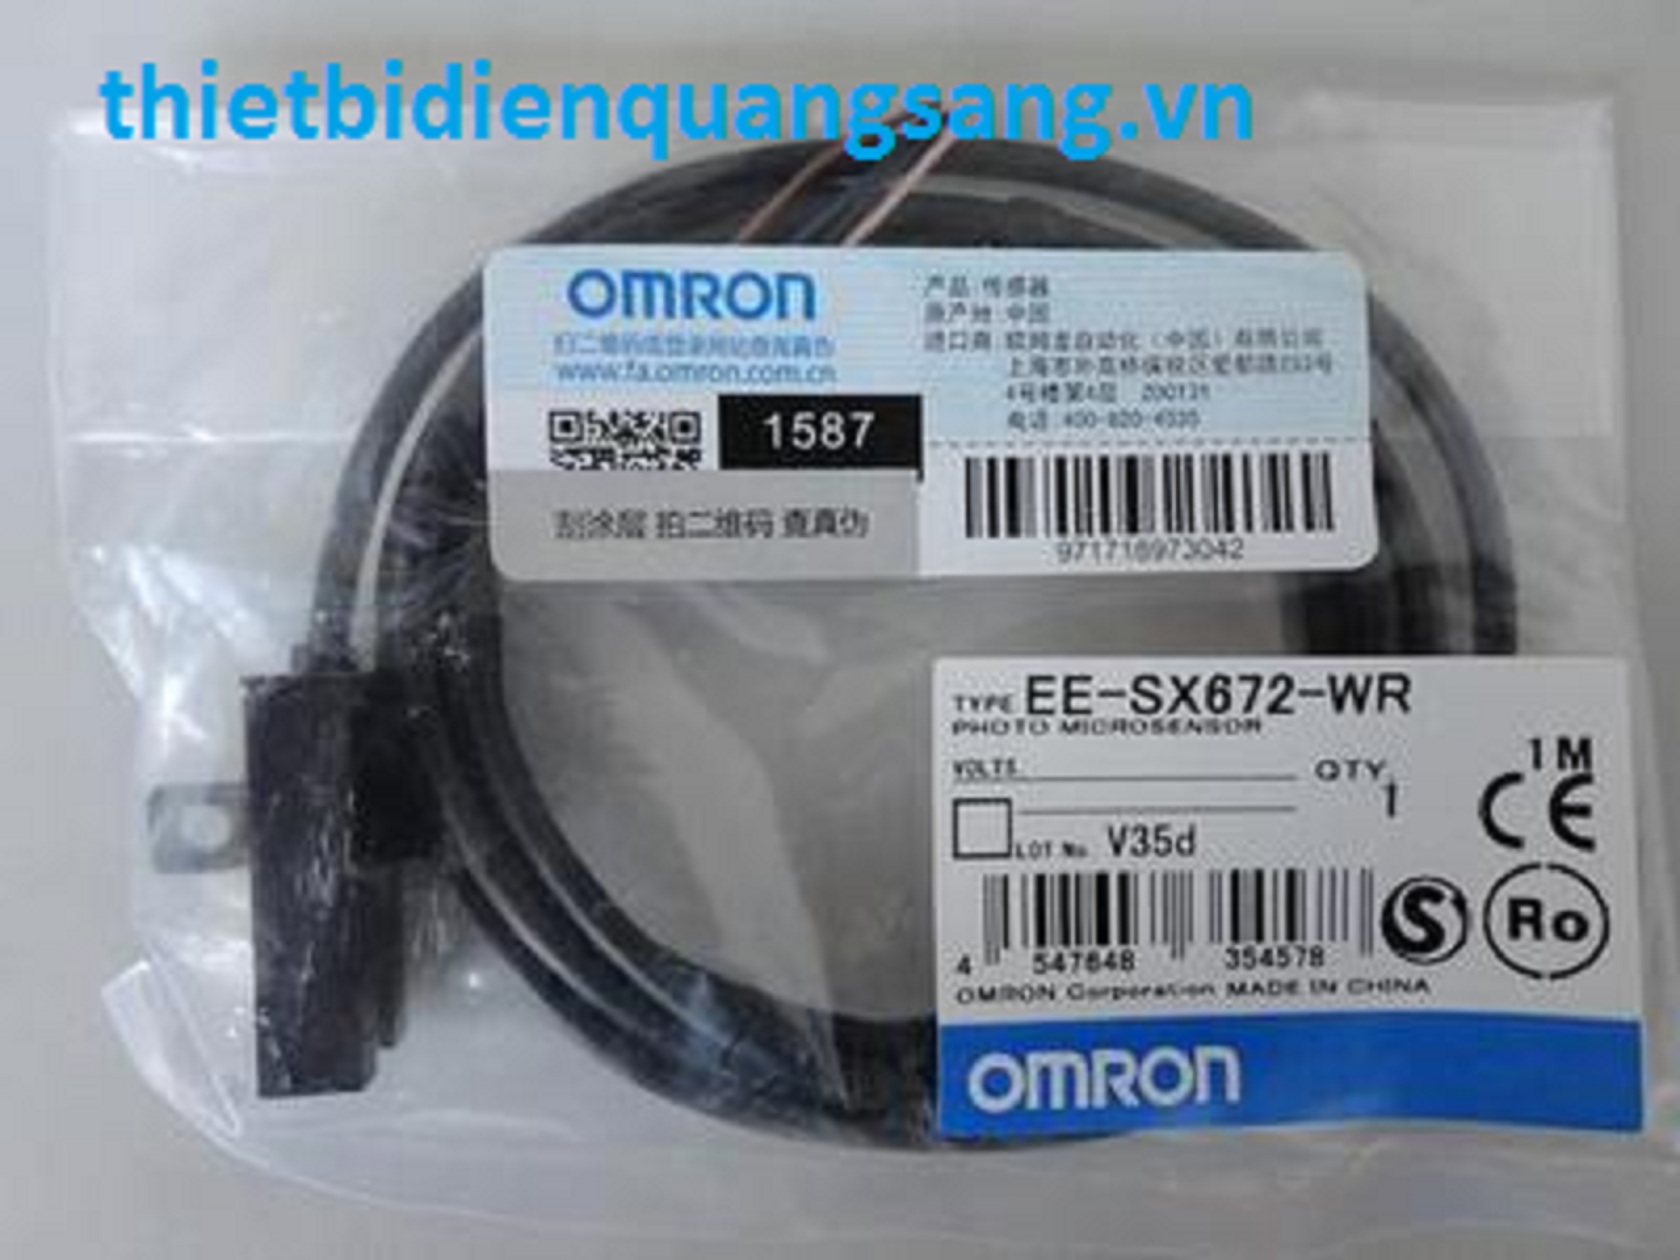 Omron EE-SX672-WR